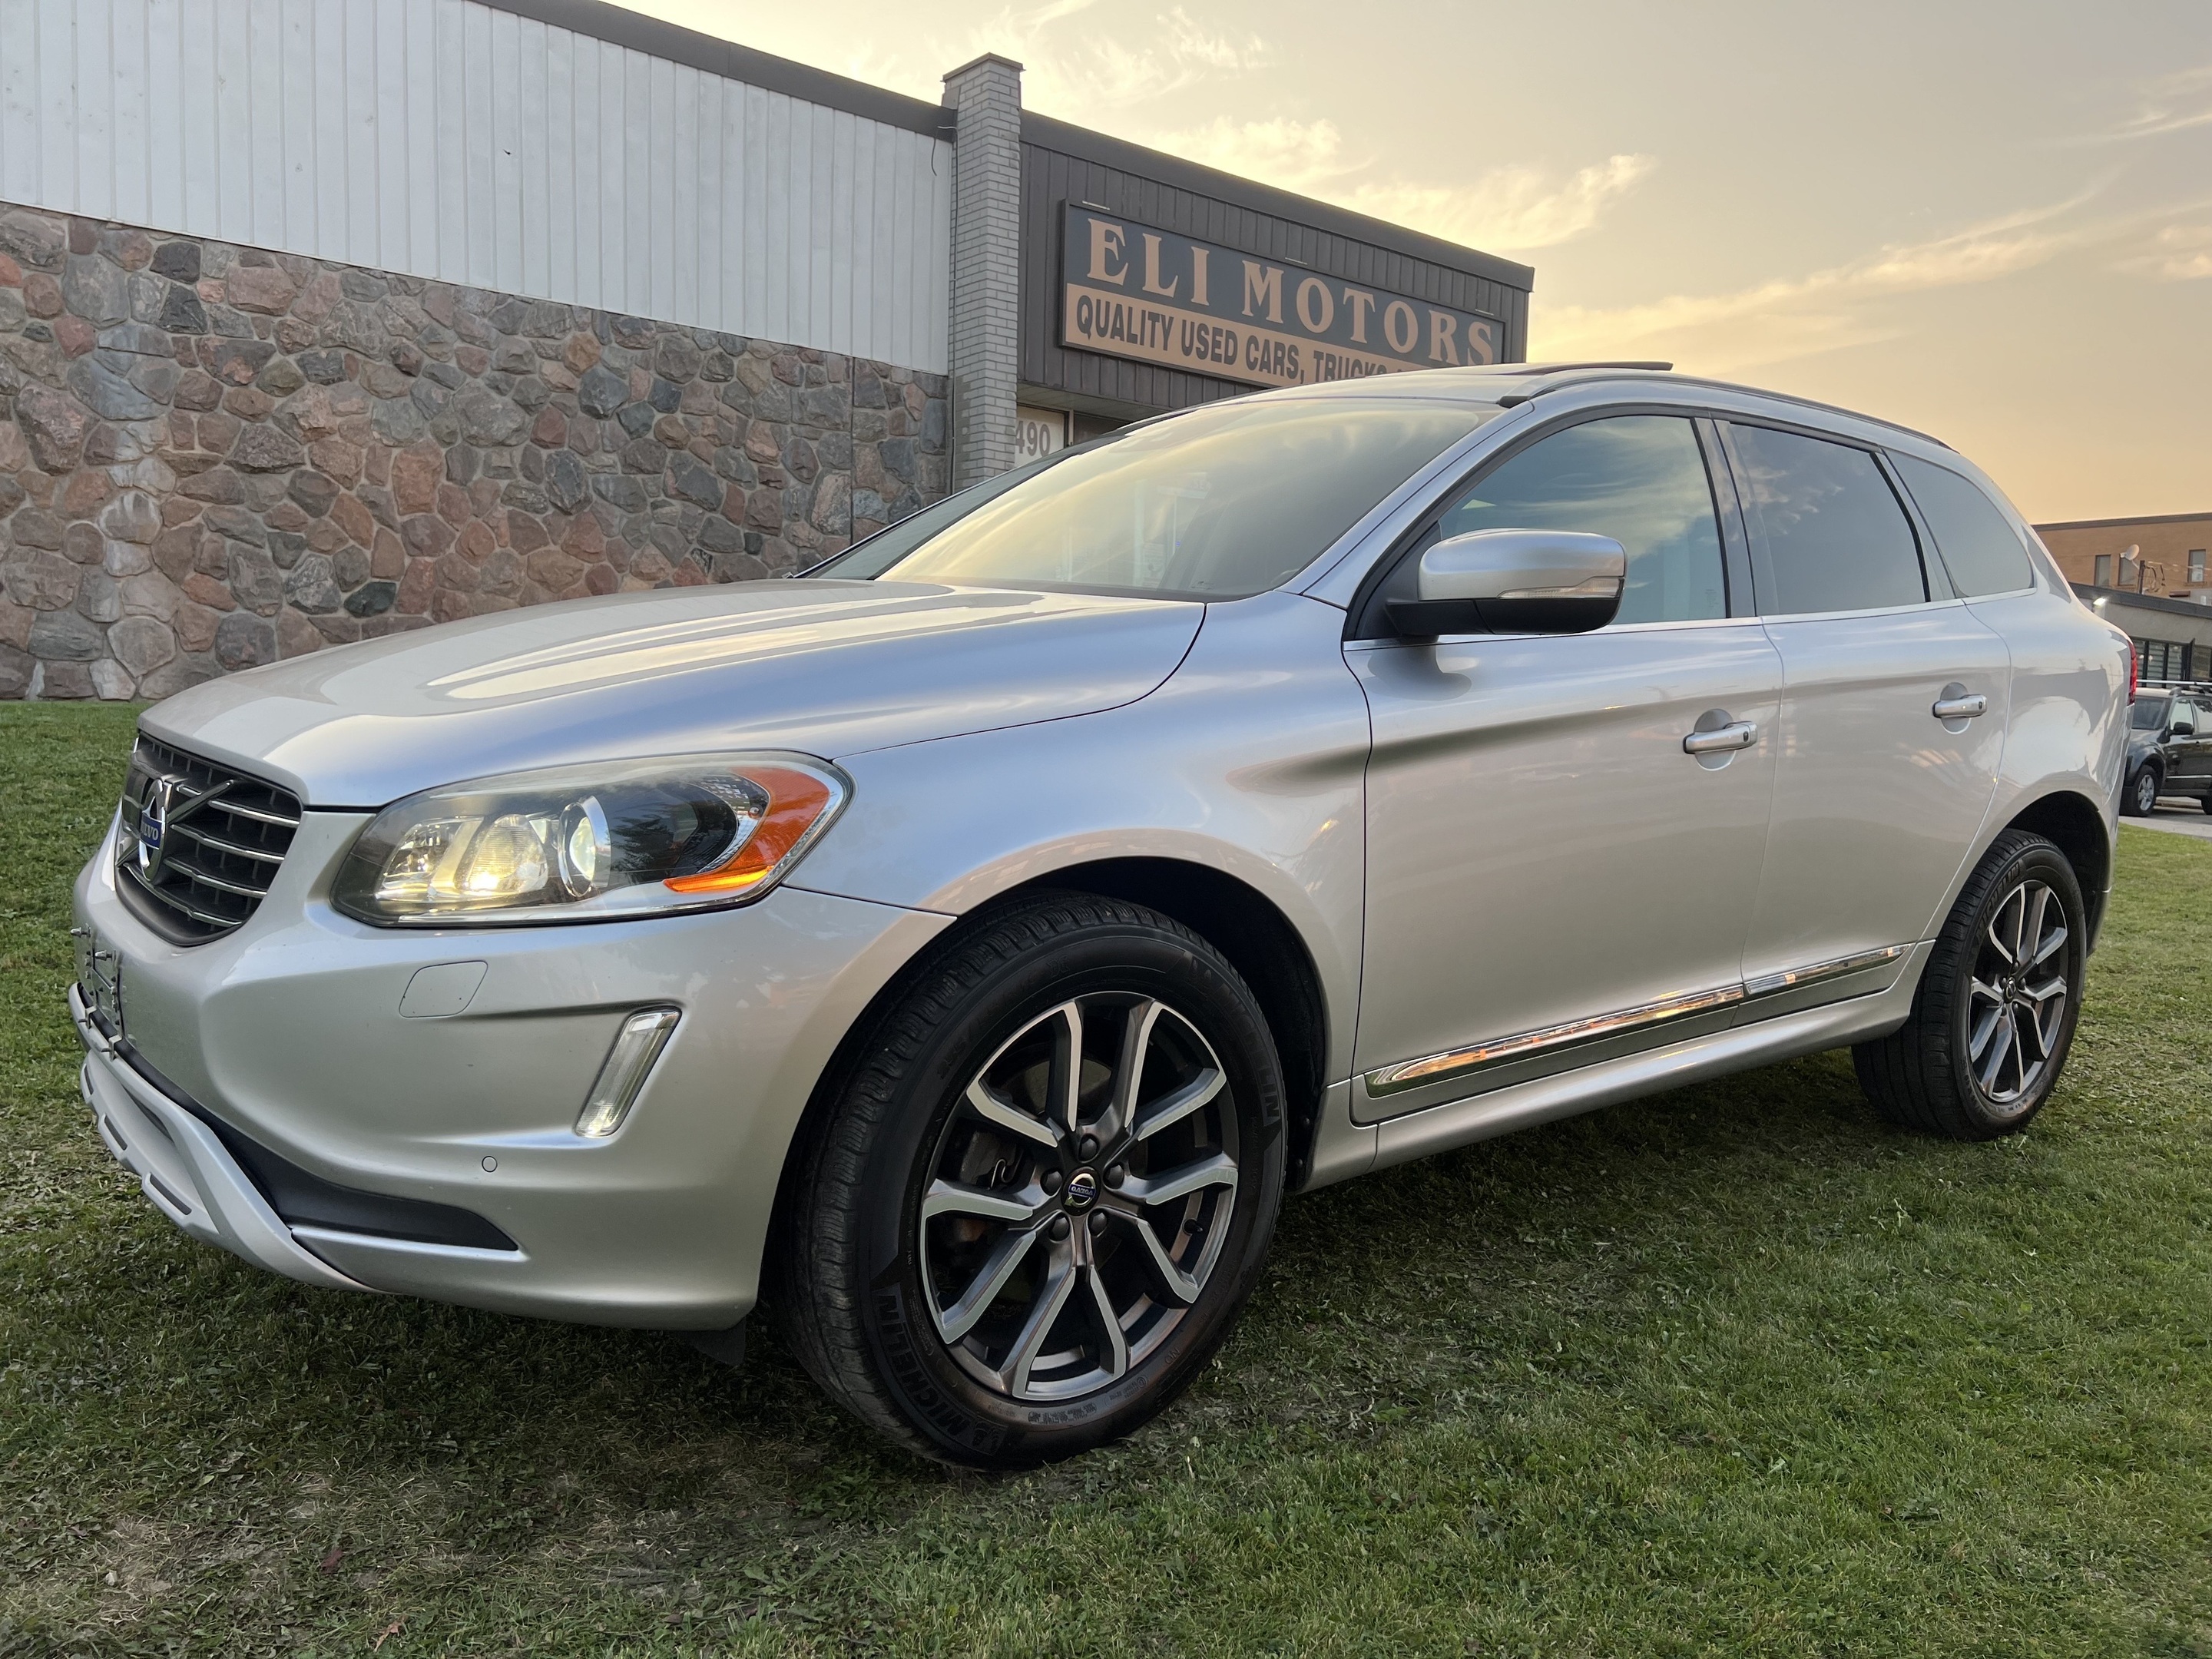 2016 Volvo XC60 AWD T5 Special Edition Premier